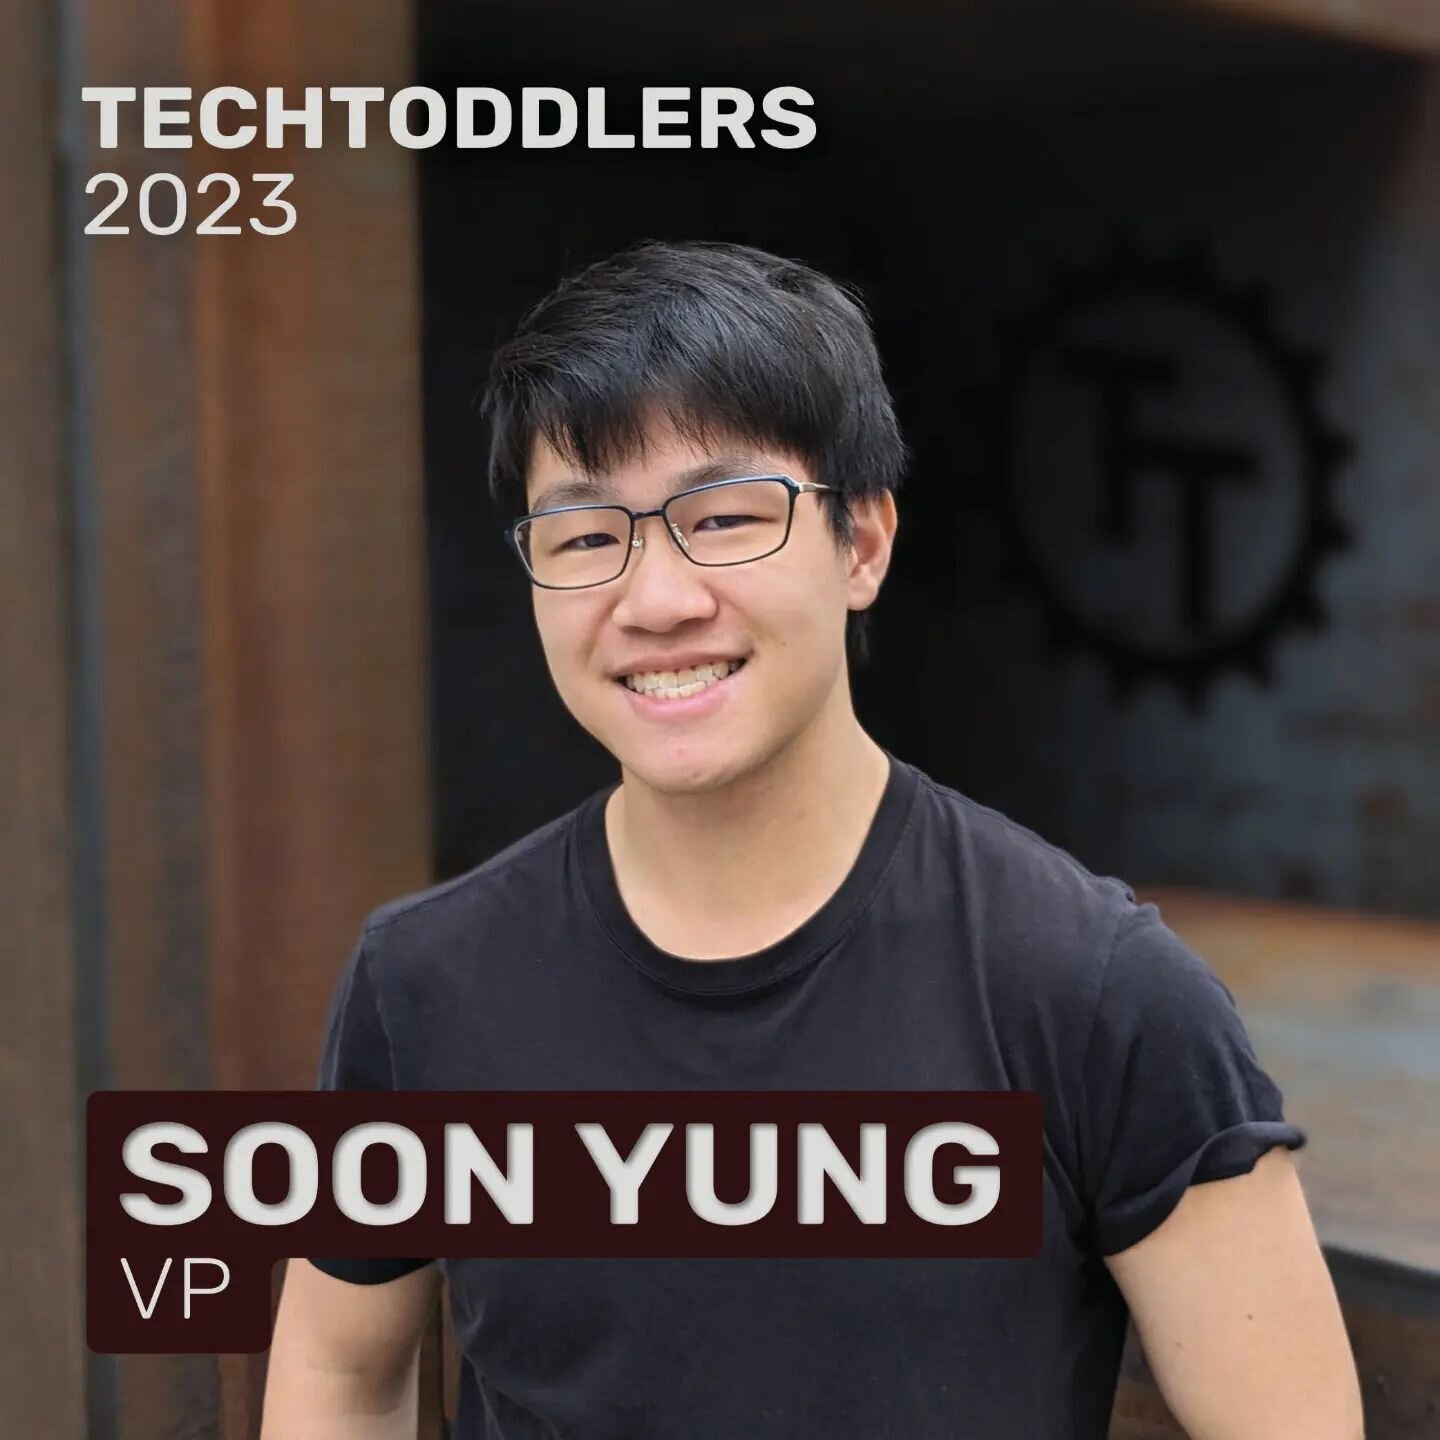 Time for some introductions! The first of our 2023 TechToddlers is none other than beat box extraordinaire Soon Yung! I say extraordinaire, because he's so good he's already started training us and workshopping @surceryic 🤯

An Electrical Engineerin